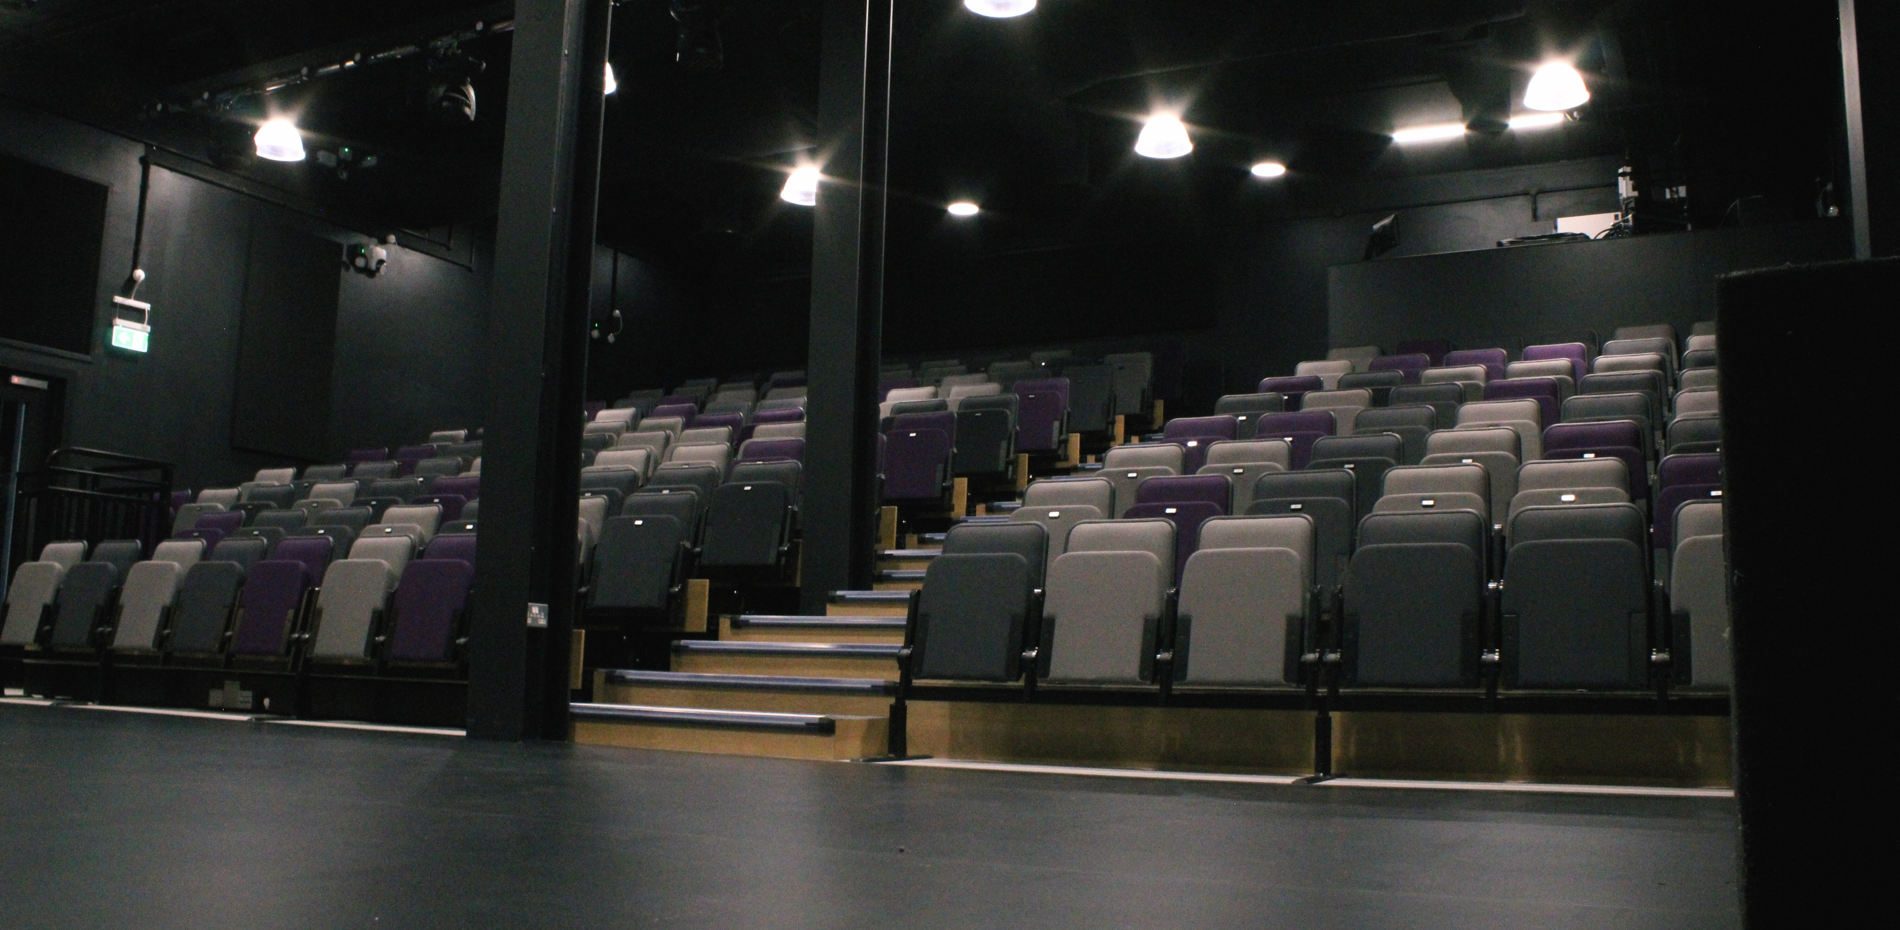 Theatre seating in performing arts